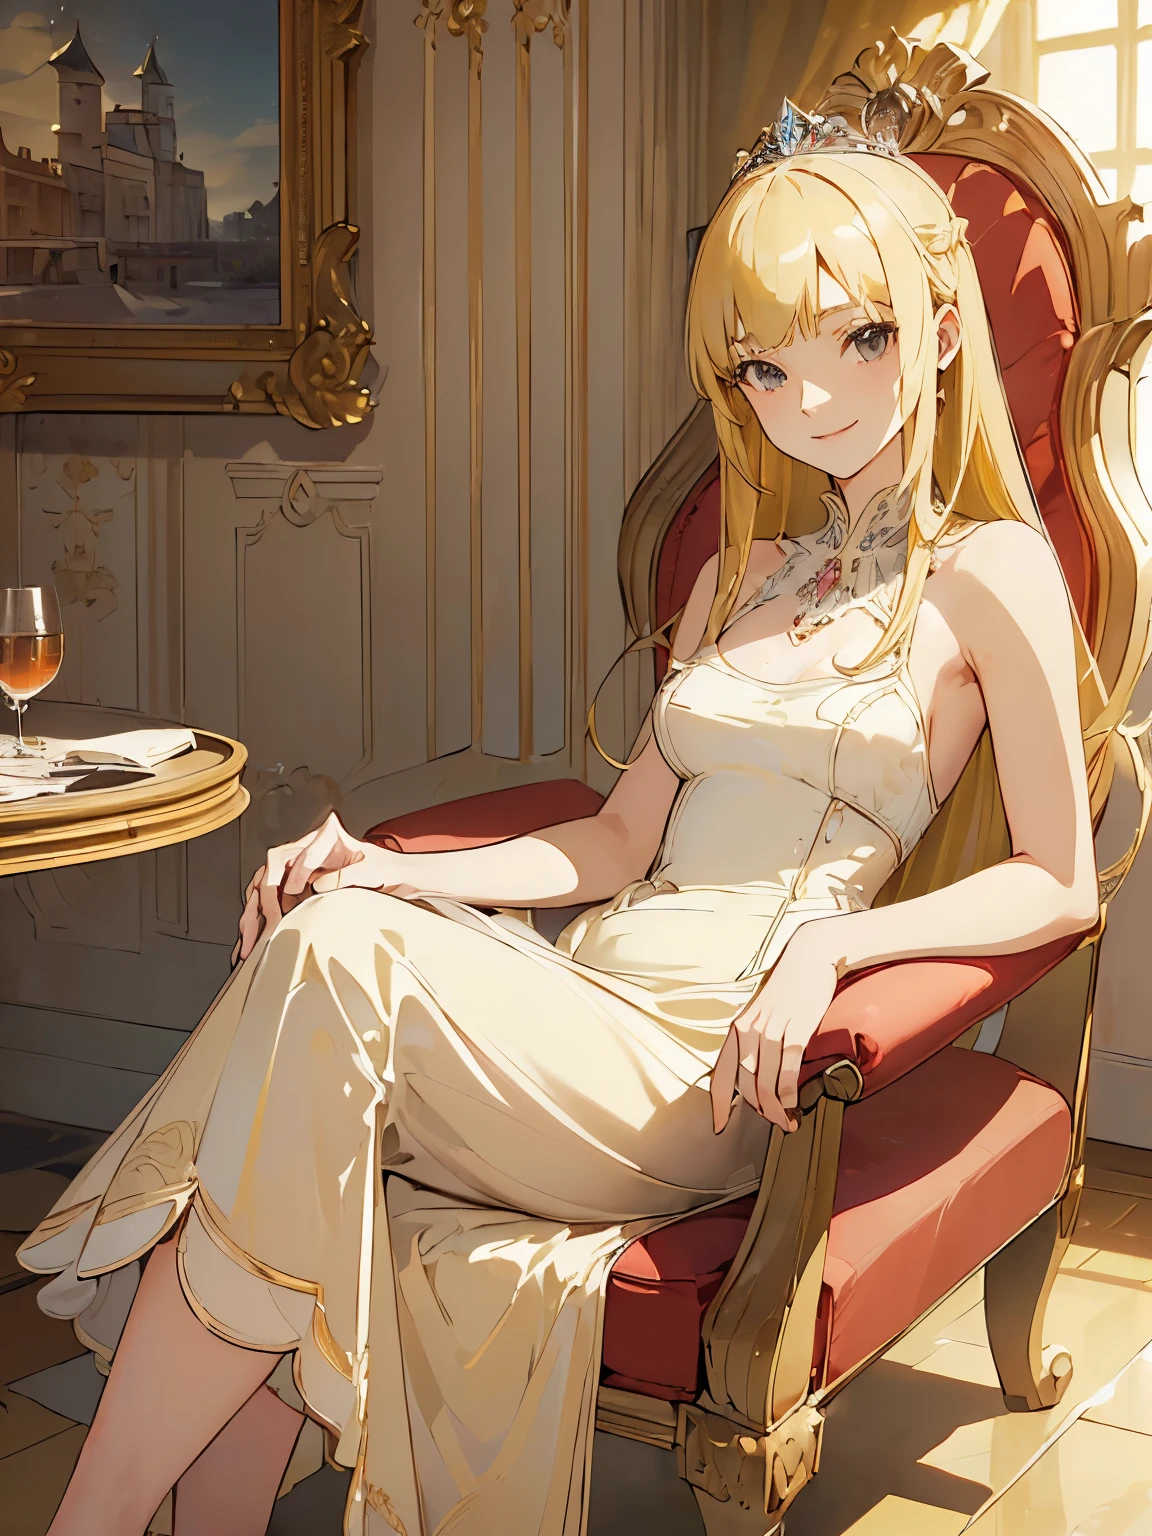 (((masterpiece))) ((( background =  inside Elegant Castle : high-class room : detail ))) (((character = young female : elegant long blonde hair with straight bang : small breast : fit body : princess dress : sitting on a chair : elegant smile )))